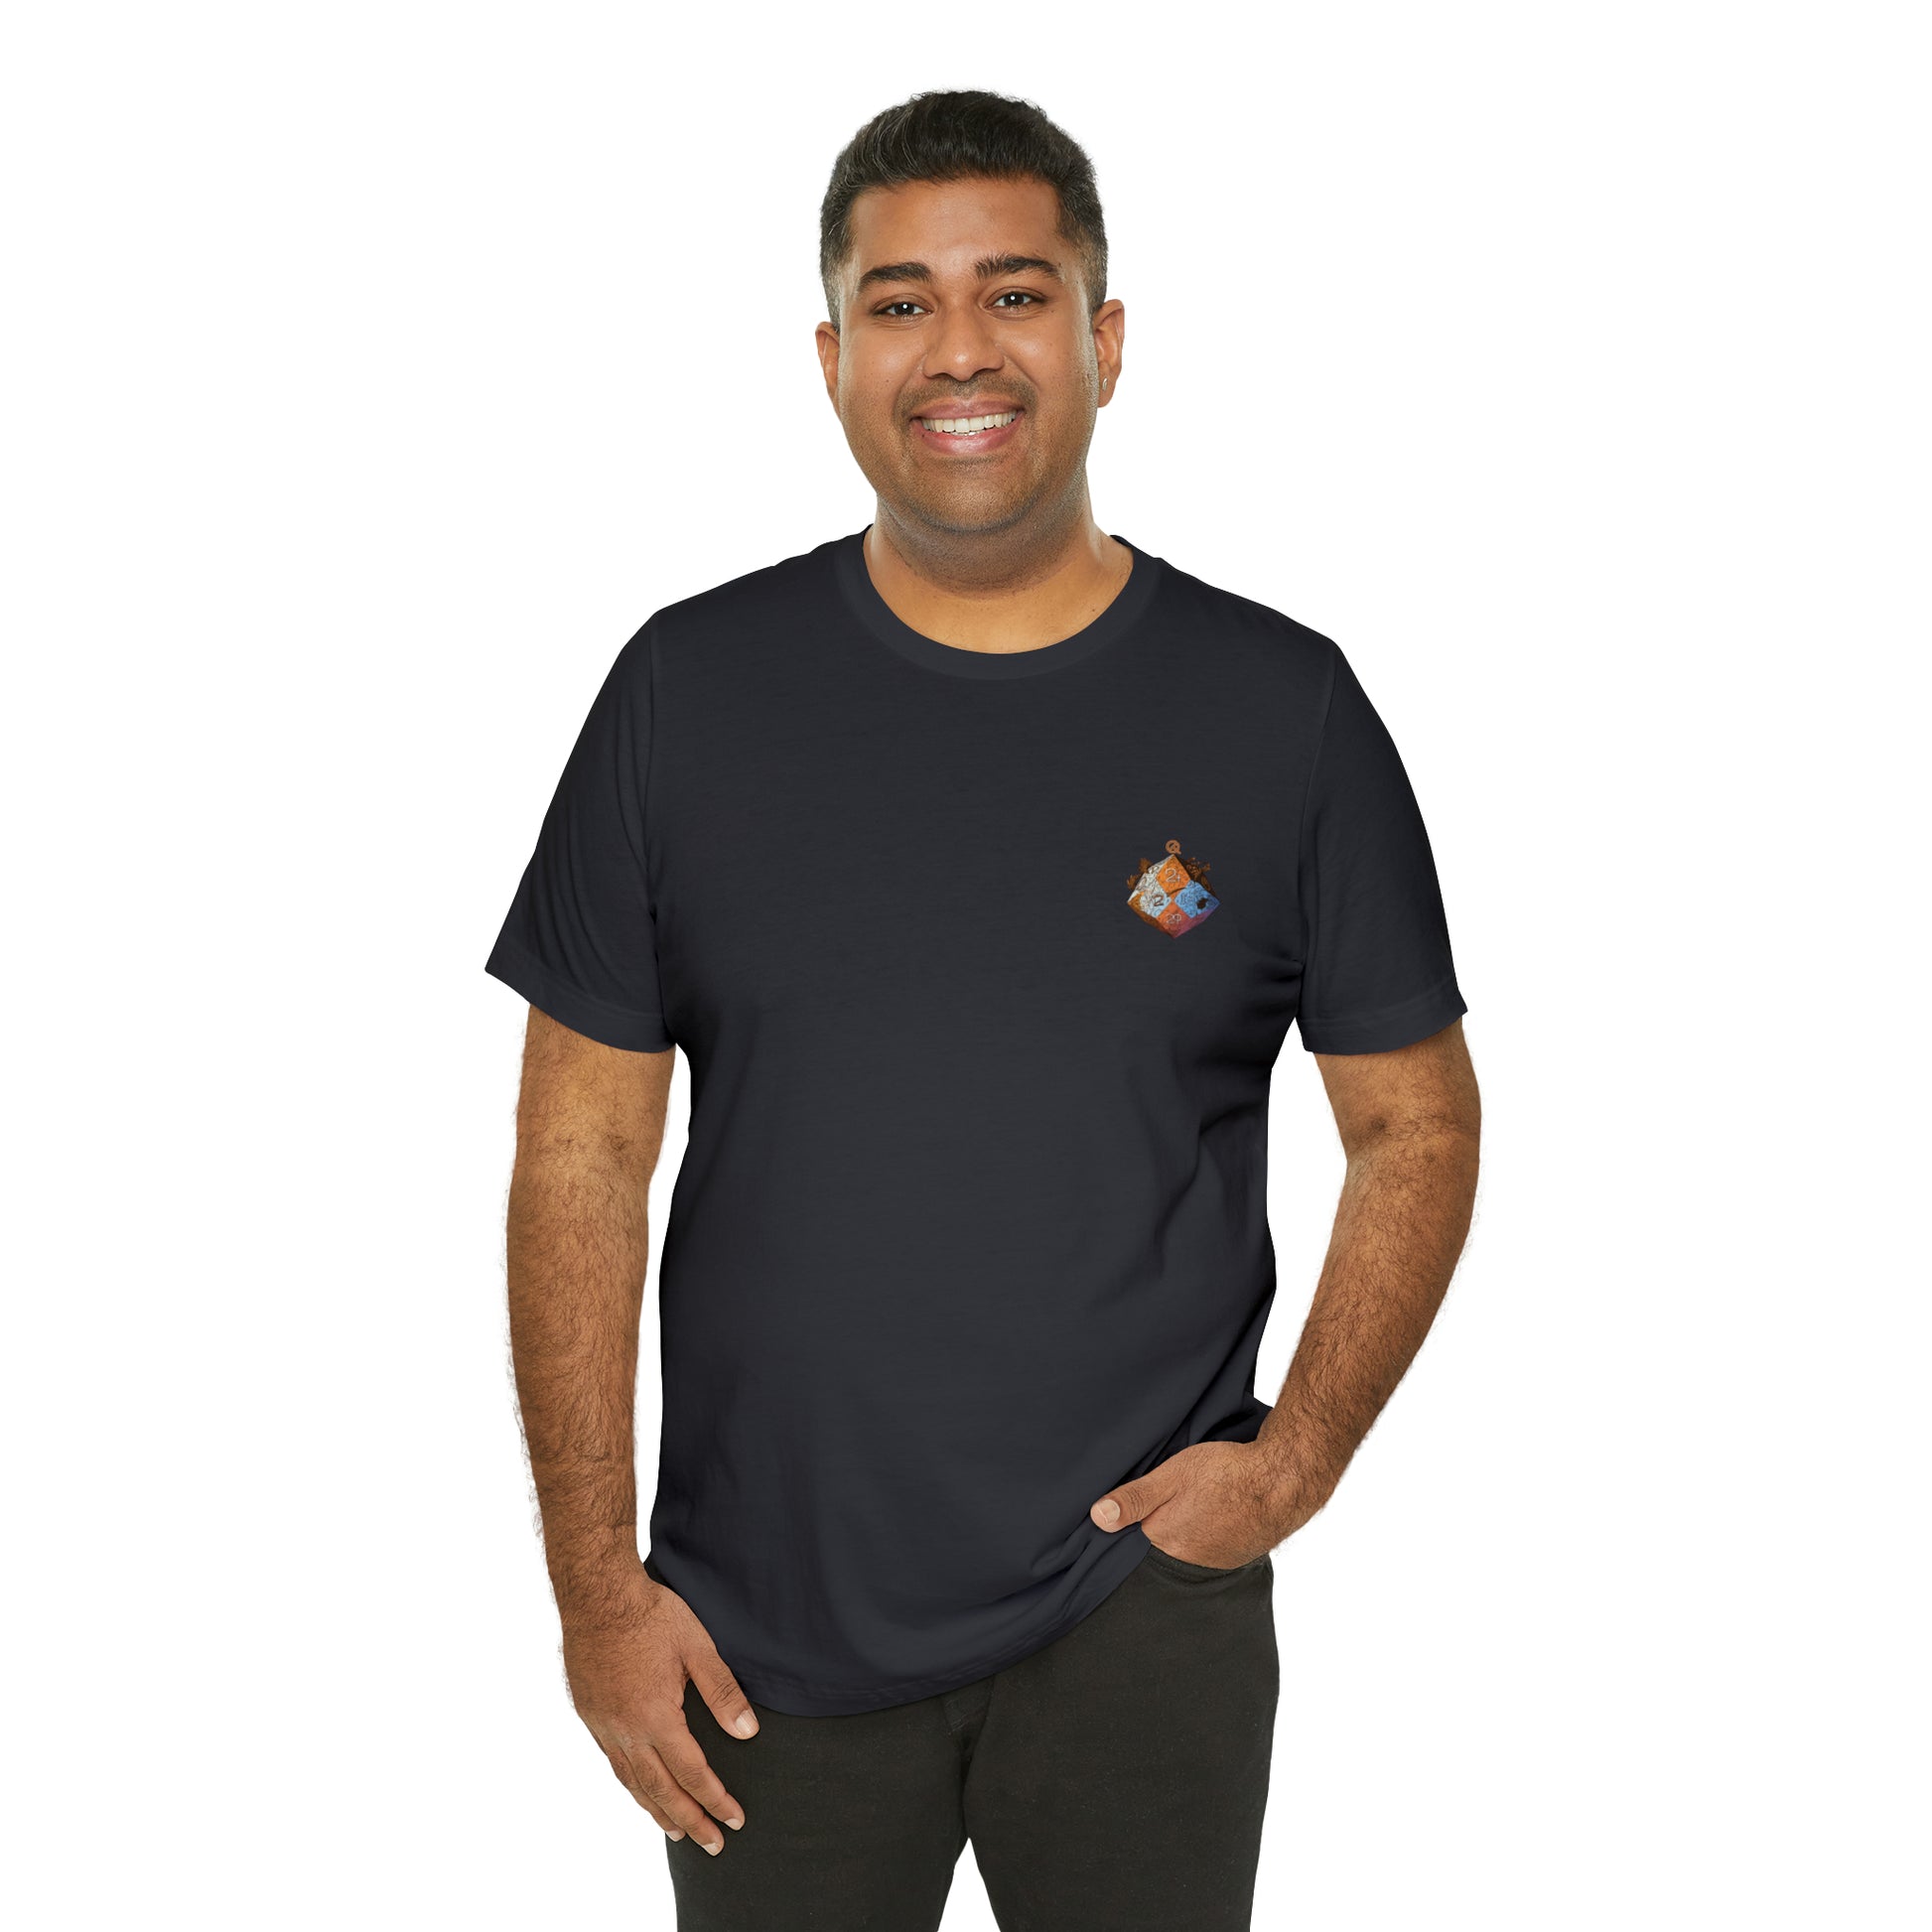 dark-grey-quest-thread-tee-shirt-with-small-orange-blue-d20-dice-on-left-chest-of-shirt